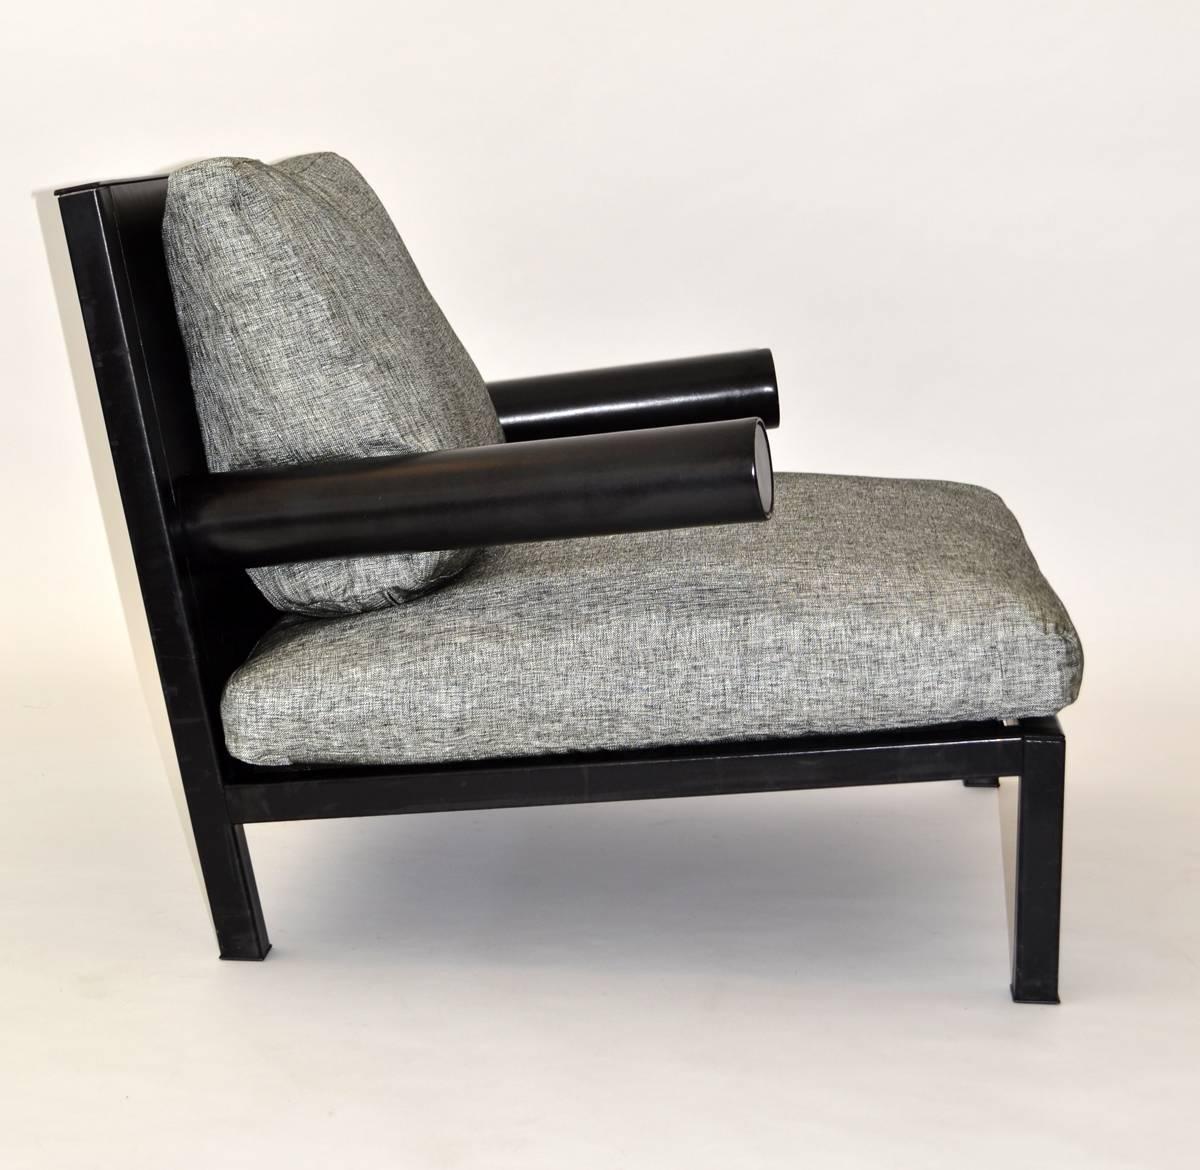 Oversized armchair wrapped in black leather over sturdy steel frame with three upholstered loose cushions. Signed.